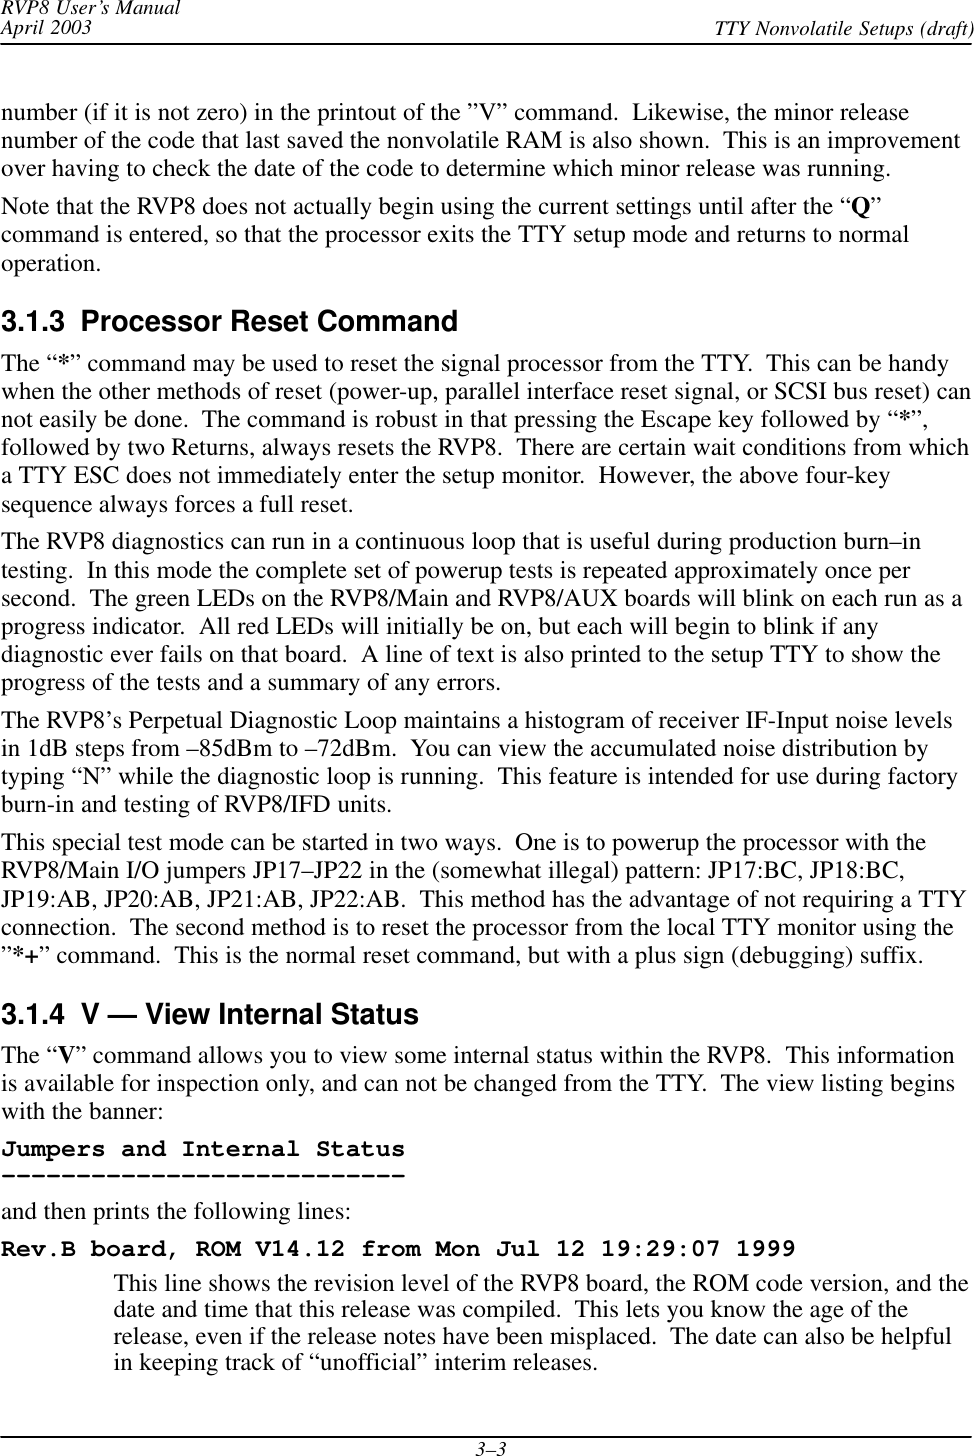 RVP8 User’s ManualApril 2003 TTY Nonvolatile Setups (draft)3–3number (if it is not zero) in the printout of the ”V” command.  Likewise, the minor releasenumber of the code that last saved the nonvolatile RAM is also shown.  This is an improvementover having to check the date of the code to determine which minor release was running.Note that the RVP8 does not actually begin using the current settings until after the “Q”command is entered, so that the processor exits the TTY setup mode and returns to normaloperation.3.1.3  Processor Reset CommandThe “*” command may be used to reset the signal processor from the TTY.  This can be handywhen the other methods of reset (power-up, parallel interface reset signal, or SCSI bus reset) cannot easily be done.  The command is robust in that pressing the Escape key followed by “*”,followed by two Returns, always resets the RVP8.  There are certain wait conditions from whicha TTY ESC does not immediately enter the setup monitor.  However, the above four-keysequence always forces a full reset.The RVP8 diagnostics can run in a continuous loop that is useful during production burn–intesting.  In this mode the complete set of powerup tests is repeated approximately once persecond.  The green LEDs on the RVP8/Main and RVP8/AUX boards will blink on each run as aprogress indicator.  All red LEDs will initially be on, but each will begin to blink if anydiagnostic ever fails on that board.  A line of text is also printed to the setup TTY to show theprogress of the tests and a summary of any errors.The RVP8’s Perpetual Diagnostic Loop maintains a histogram of receiver IF-Input noise levelsin 1dB steps from –85dBm to –72dBm.  You can view the accumulated noise distribution bytyping “N” while the diagnostic loop is running.  This feature is intended for use during factoryburn-in and testing of RVP8/IFD units.This special test mode can be started in two ways.  One is to powerup the processor with theRVP8/Main I/O jumpers JP17–JP22 in the (somewhat illegal) pattern: JP17:BC, JP18:BC,JP19:AB, JP20:AB, JP21:AB, JP22:AB.  This method has the advantage of not requiring a TTYconnection.  The second method is to reset the processor from the local TTY monitor using the”*+” command.  This is the normal reset command, but with a plus sign (debugging) suffix.3.1.4  V — View Internal StatusThe “V” command allows you to view some internal status within the RVP8.  This informationis available for inspection only, and can not be changed from the TTY.  The view listing beginswith the banner:Jumpers and Internal Status–––––––––––––––––––––––––––and then prints the following lines:Rev.B board, ROM V14.12 from Mon Jul 12 19:29:07 1999This line shows the revision level of the RVP8 board, the ROM code version, and thedate and time that this release was compiled.  This lets you know the age of therelease, even if the release notes have been misplaced.  The date can also be helpfulin keeping track of “unofficial” interim releases.